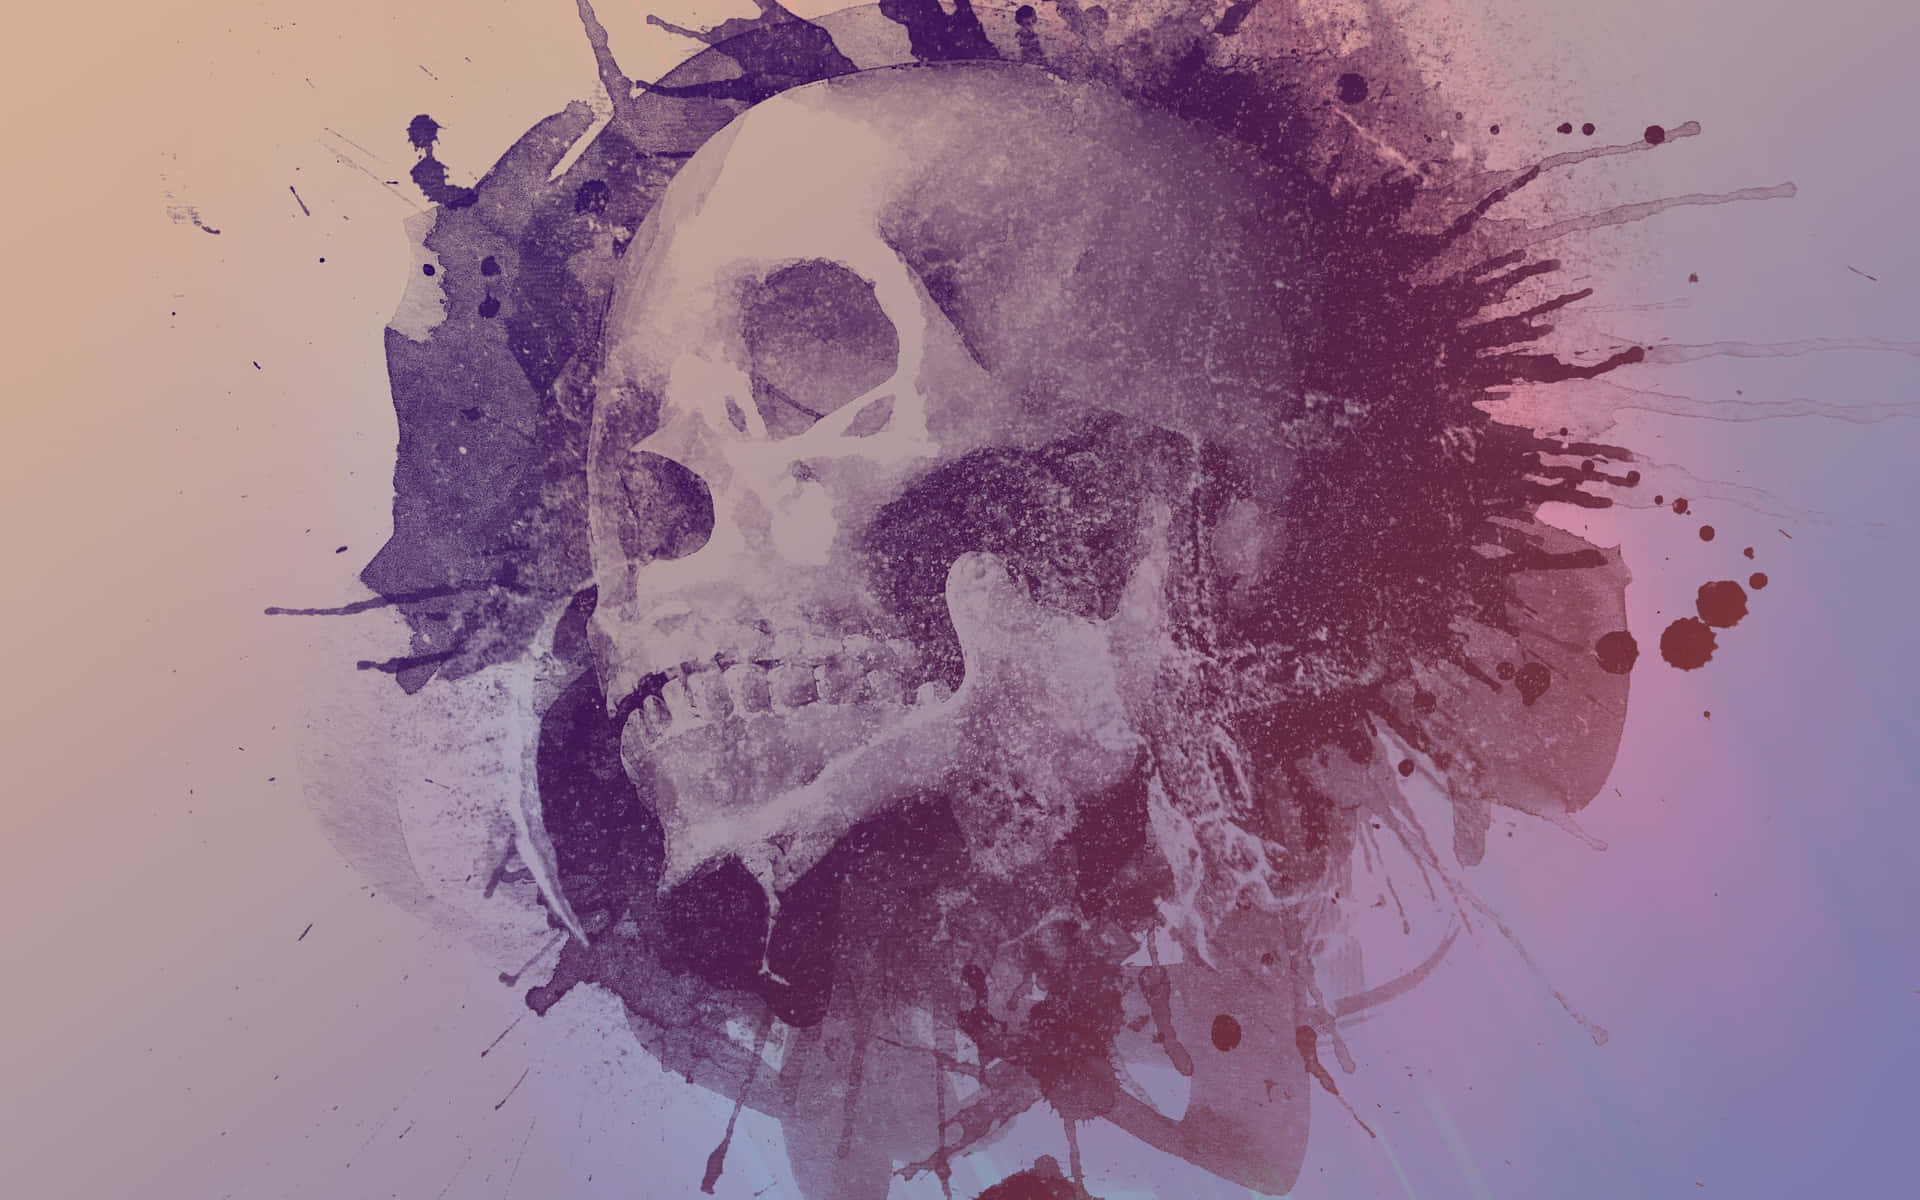 "Explore The Universe While Rocking This Galaxy Skull" Wallpaper